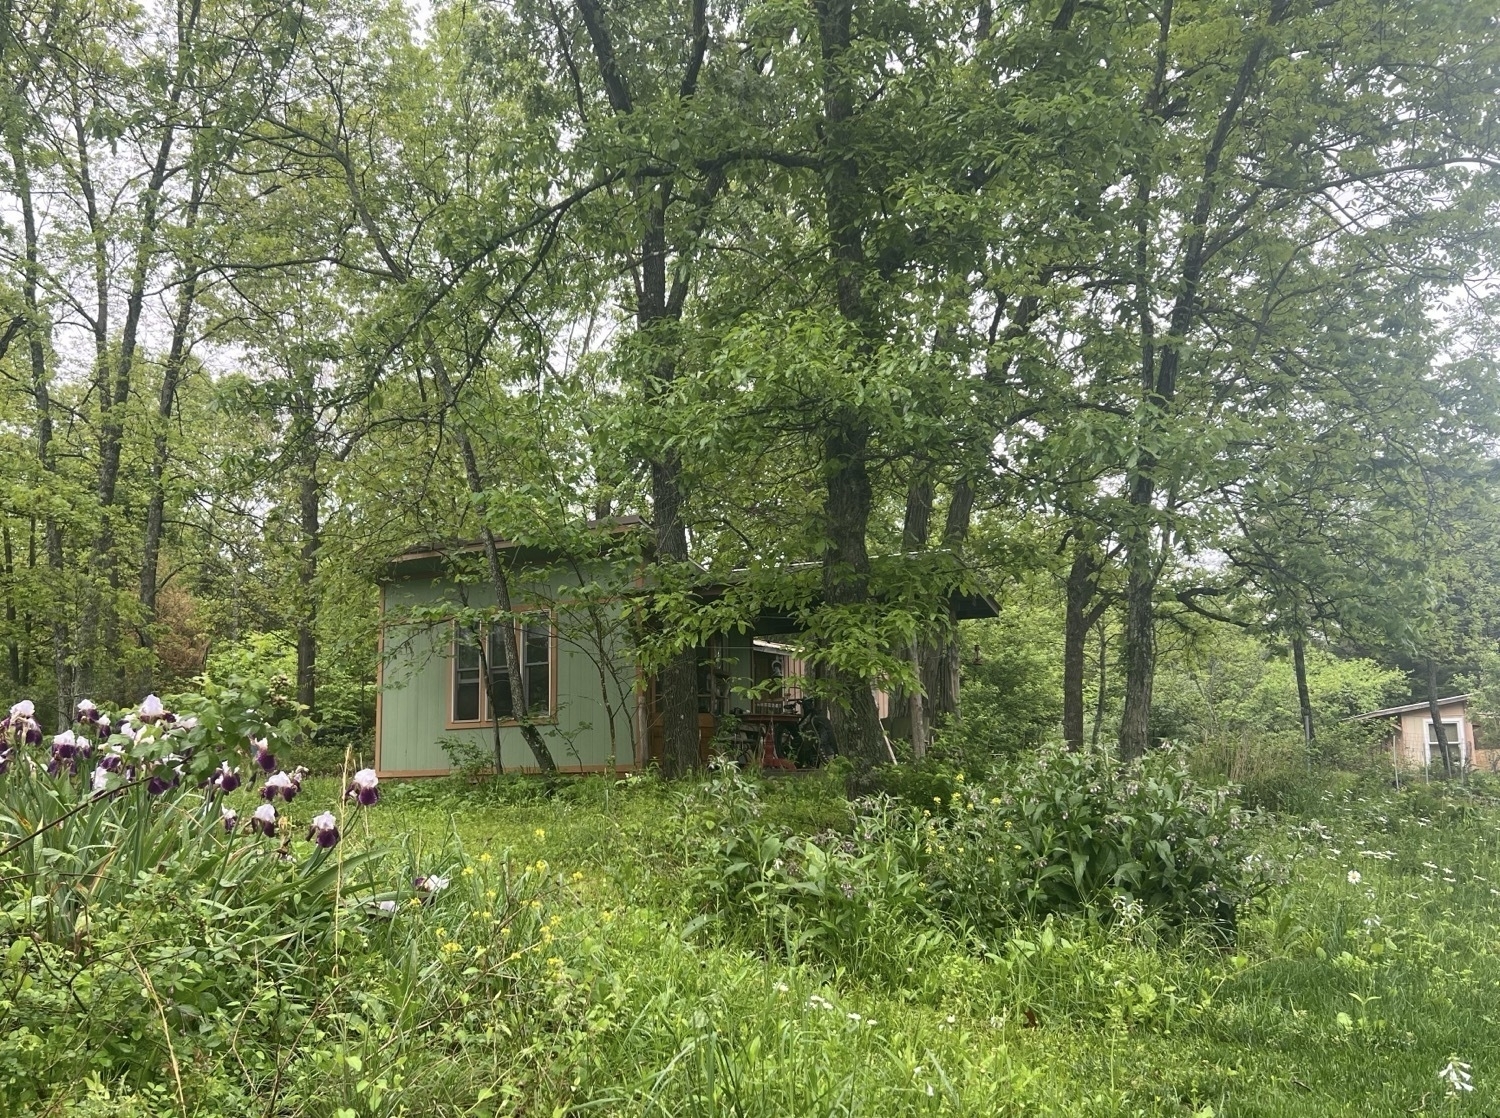 Green foliage surrounds a tiny green house in the woods. In the foreground are a mix of tall flowers and grasses. The green cabin is set back and is surrounded by a mix of tall mature trees.